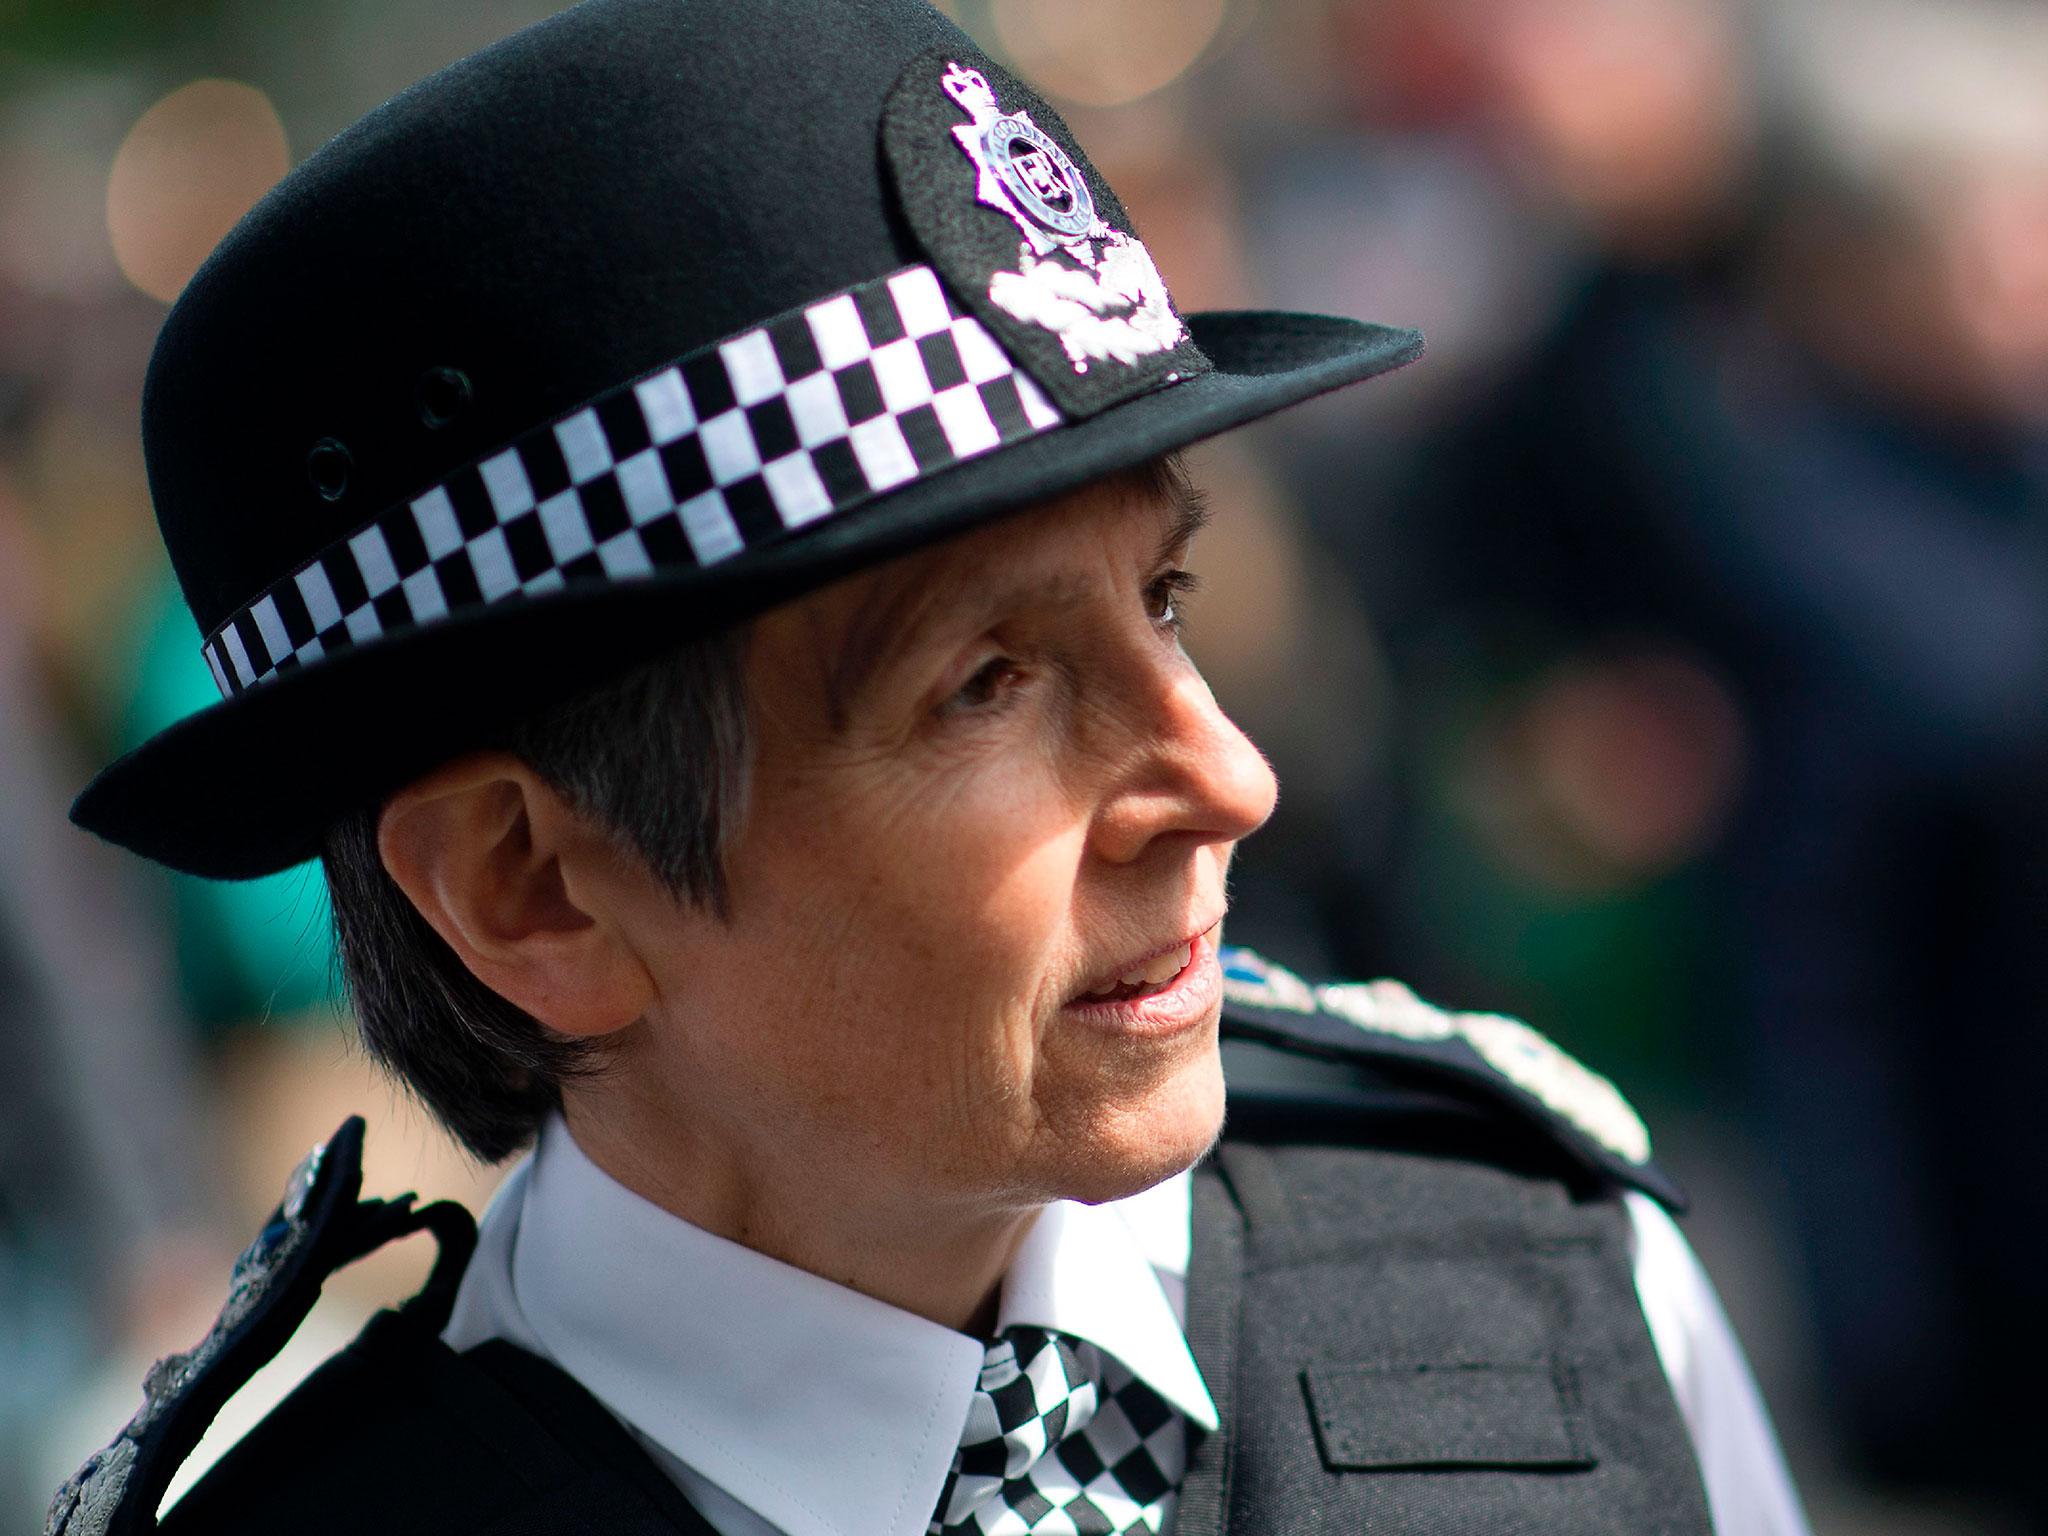 Cressida Dick suggested other areas of policing may have to be cut if resources are not increased